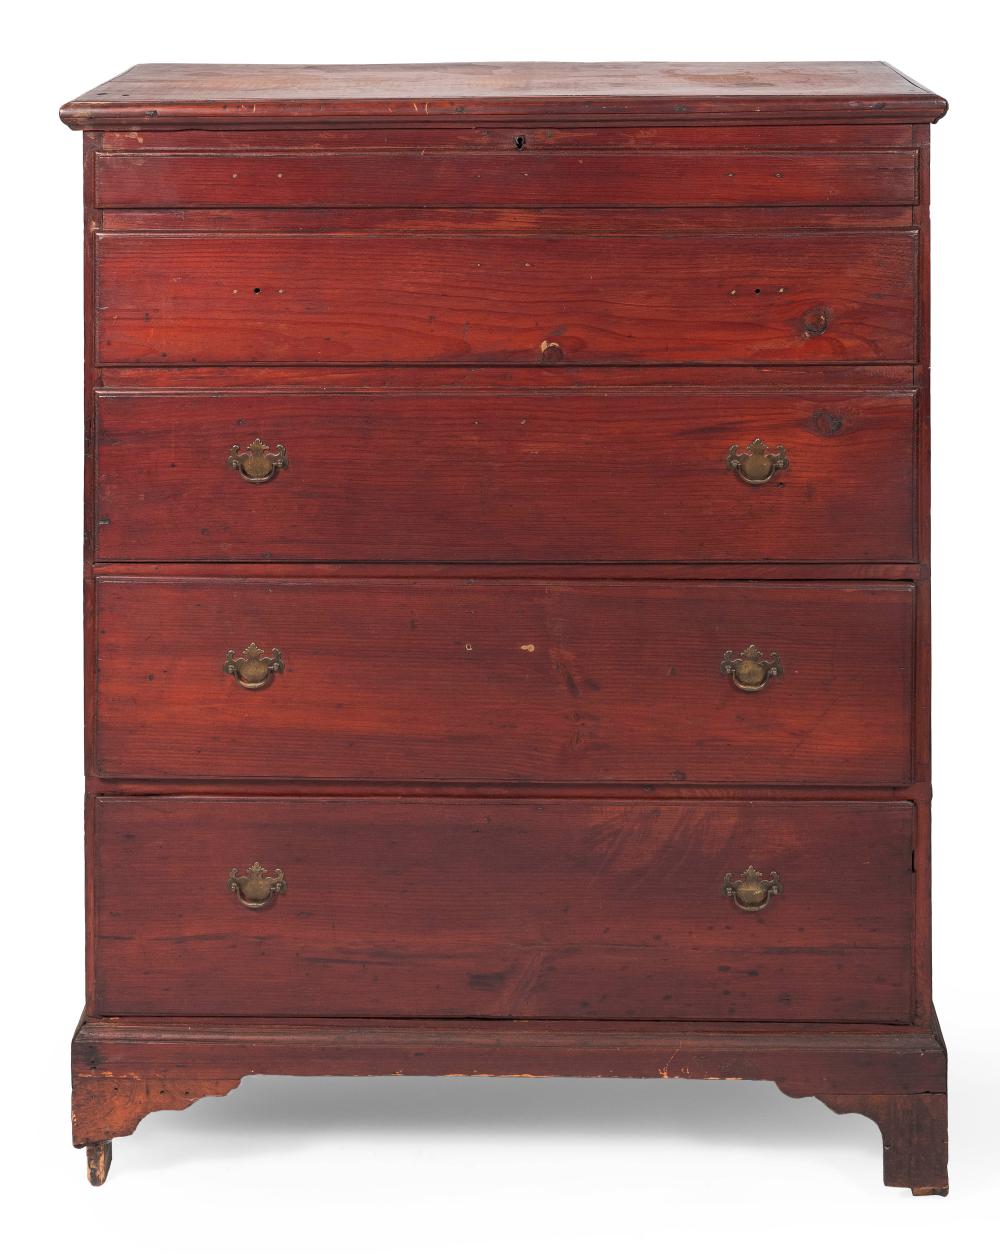 TALL BLANKET CHEST CONNECTICUT 34db20